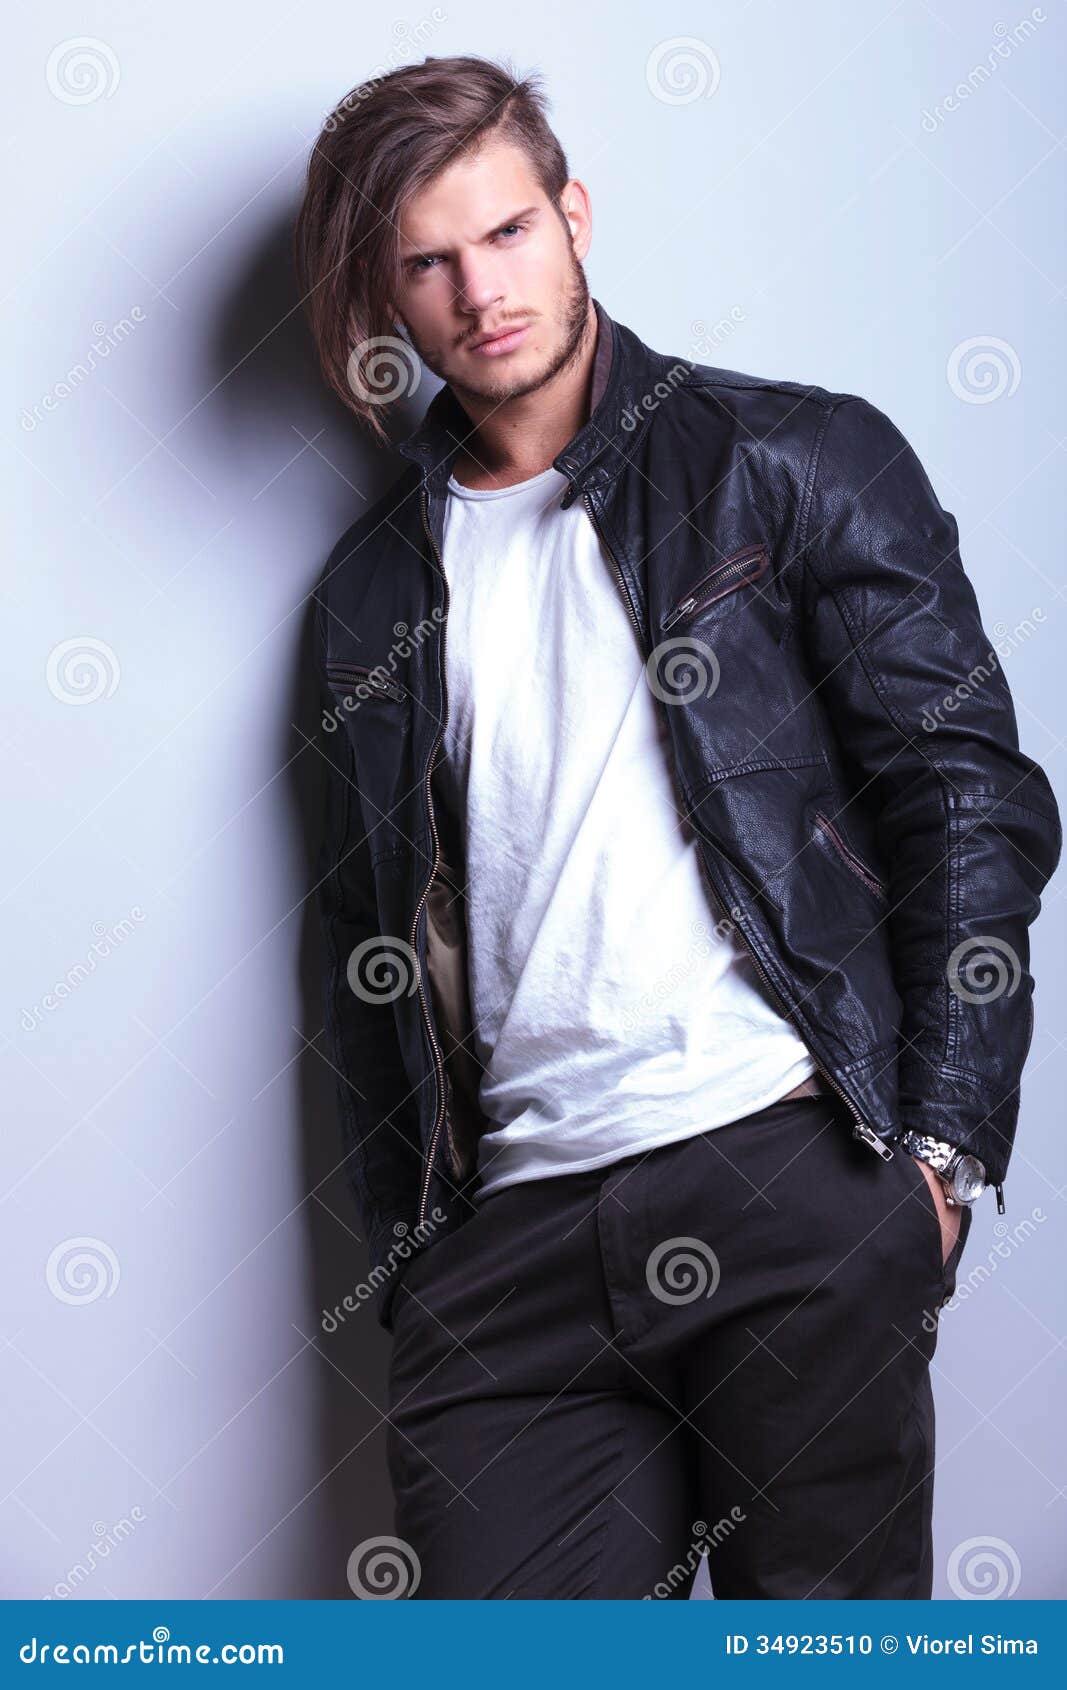 Man in Leather Jacket Leaning Against a Gray Wall Stock Photo - Image ...